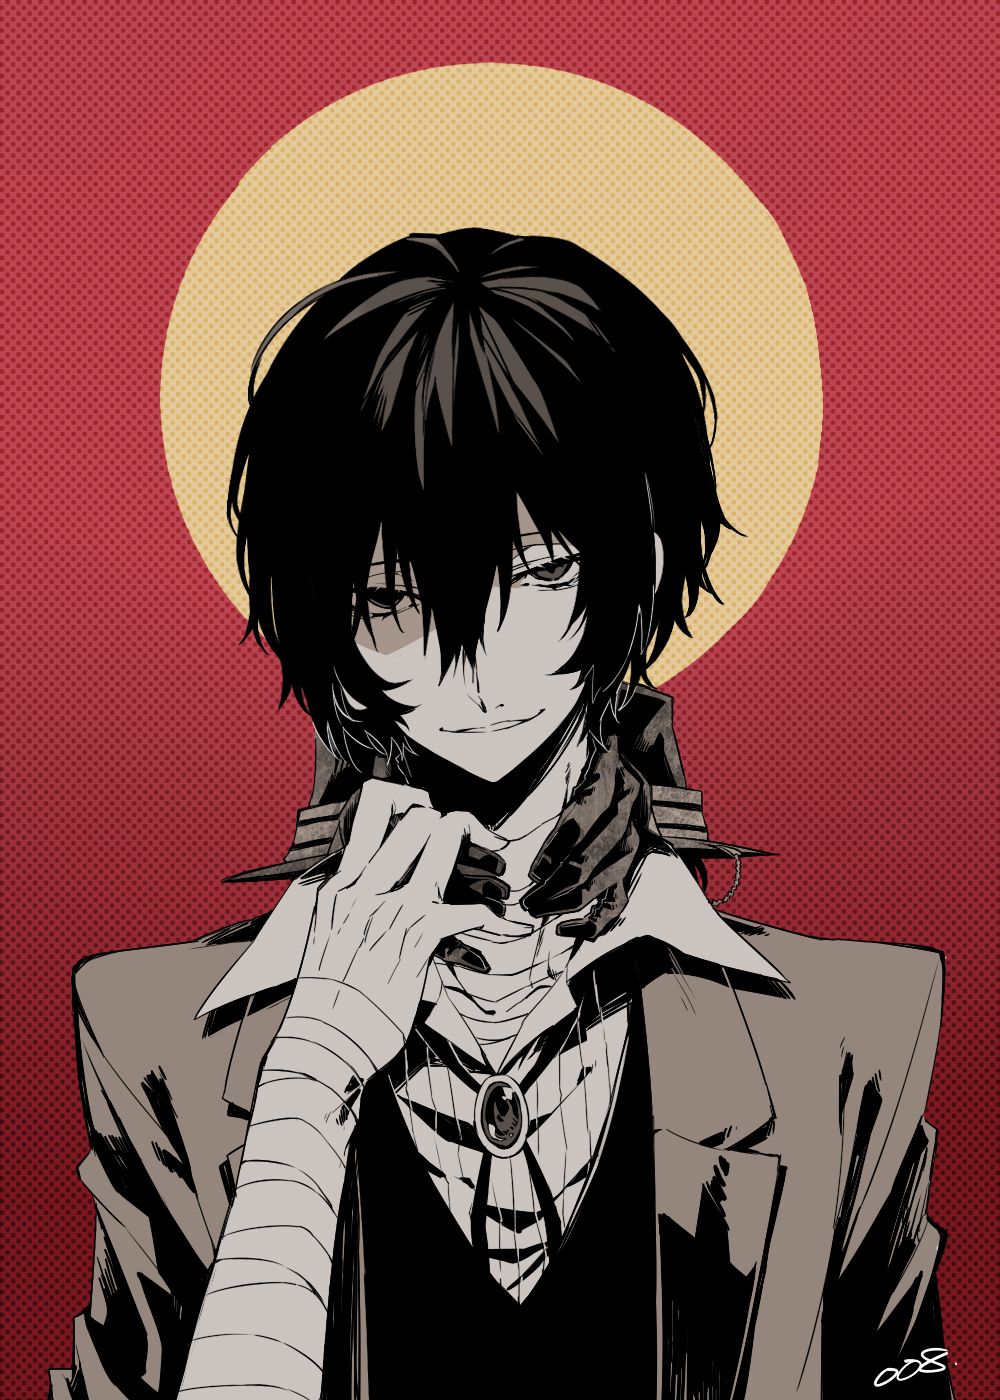 10 eccentric anime characters like Dazai from Bungo Stray Dogs